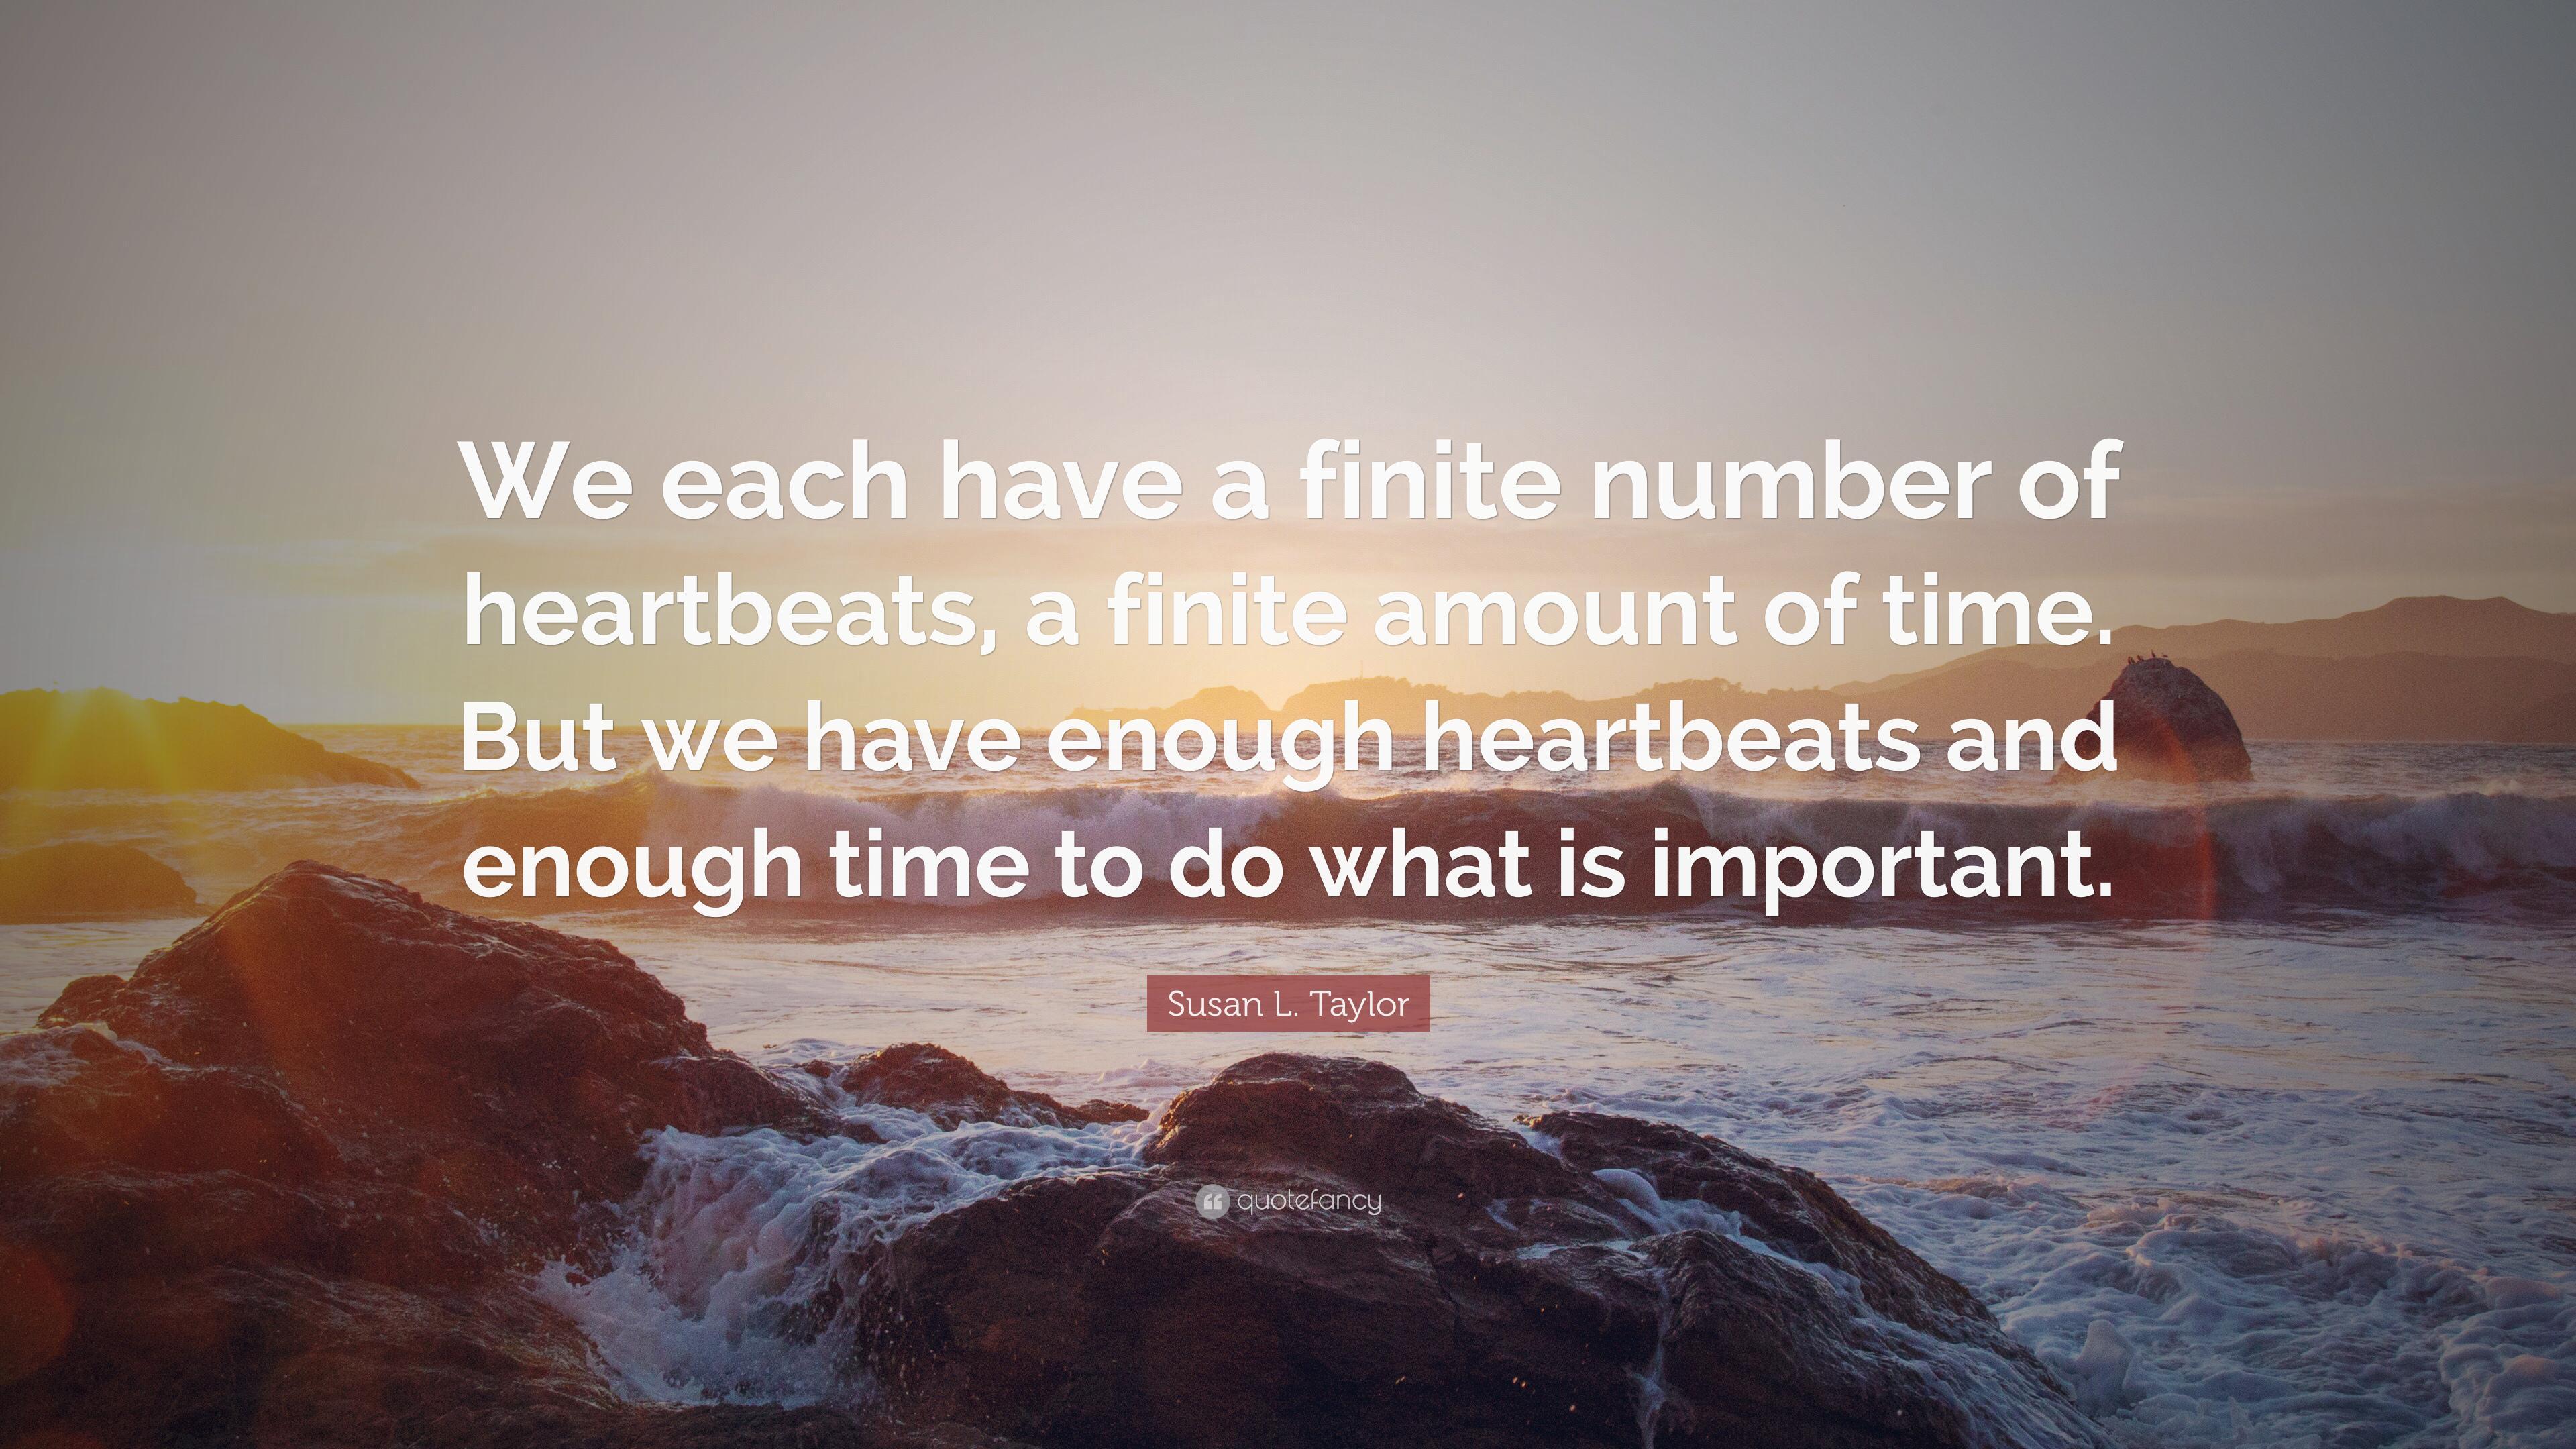 Susan L. Taylor Quote: “We each have a finite number